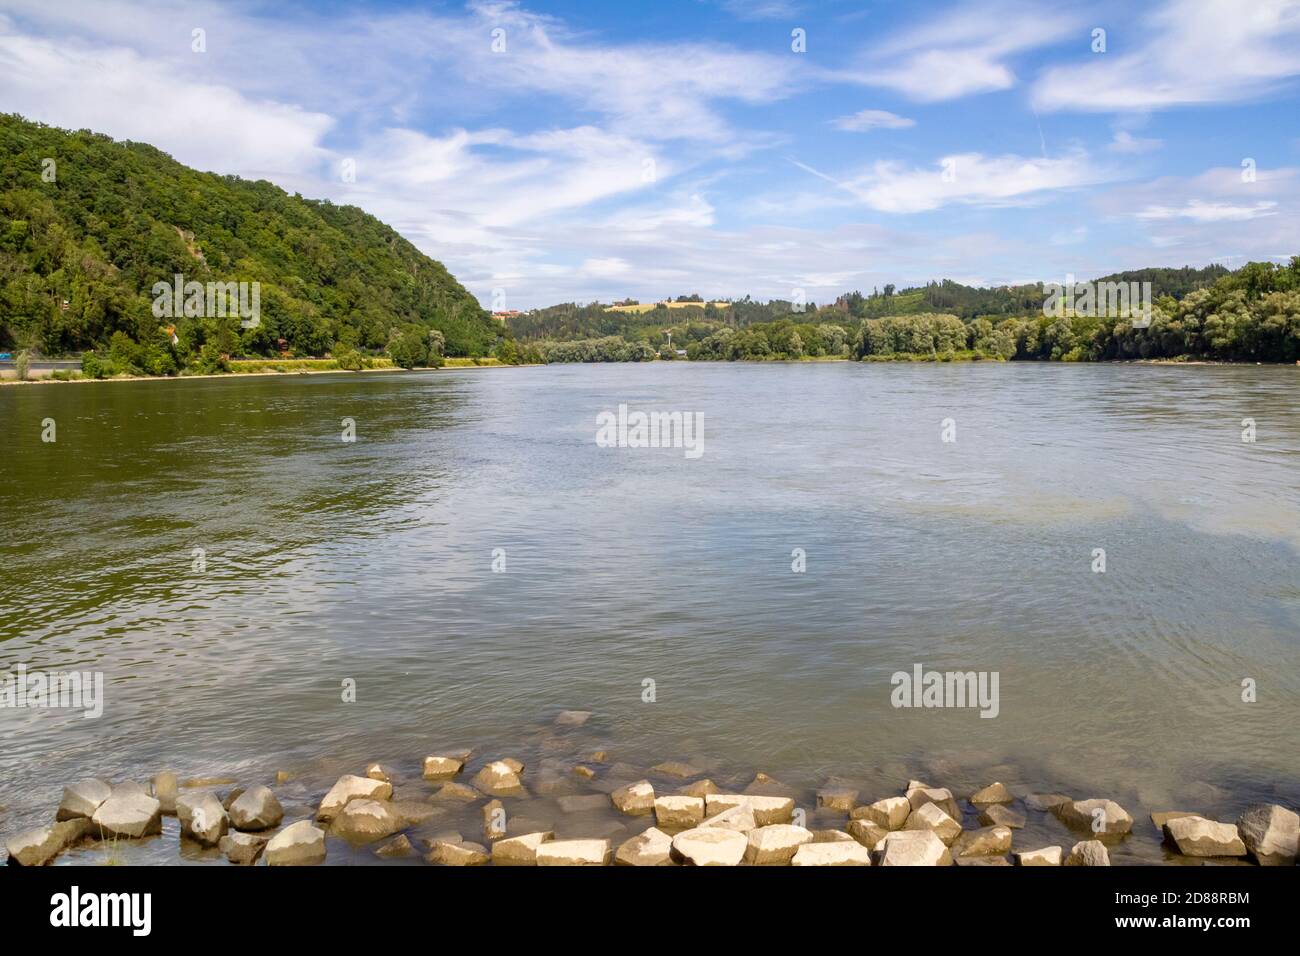 waterside scenery around Passau, a town in Lower Bavaria in Germany at summer time Stock Photo